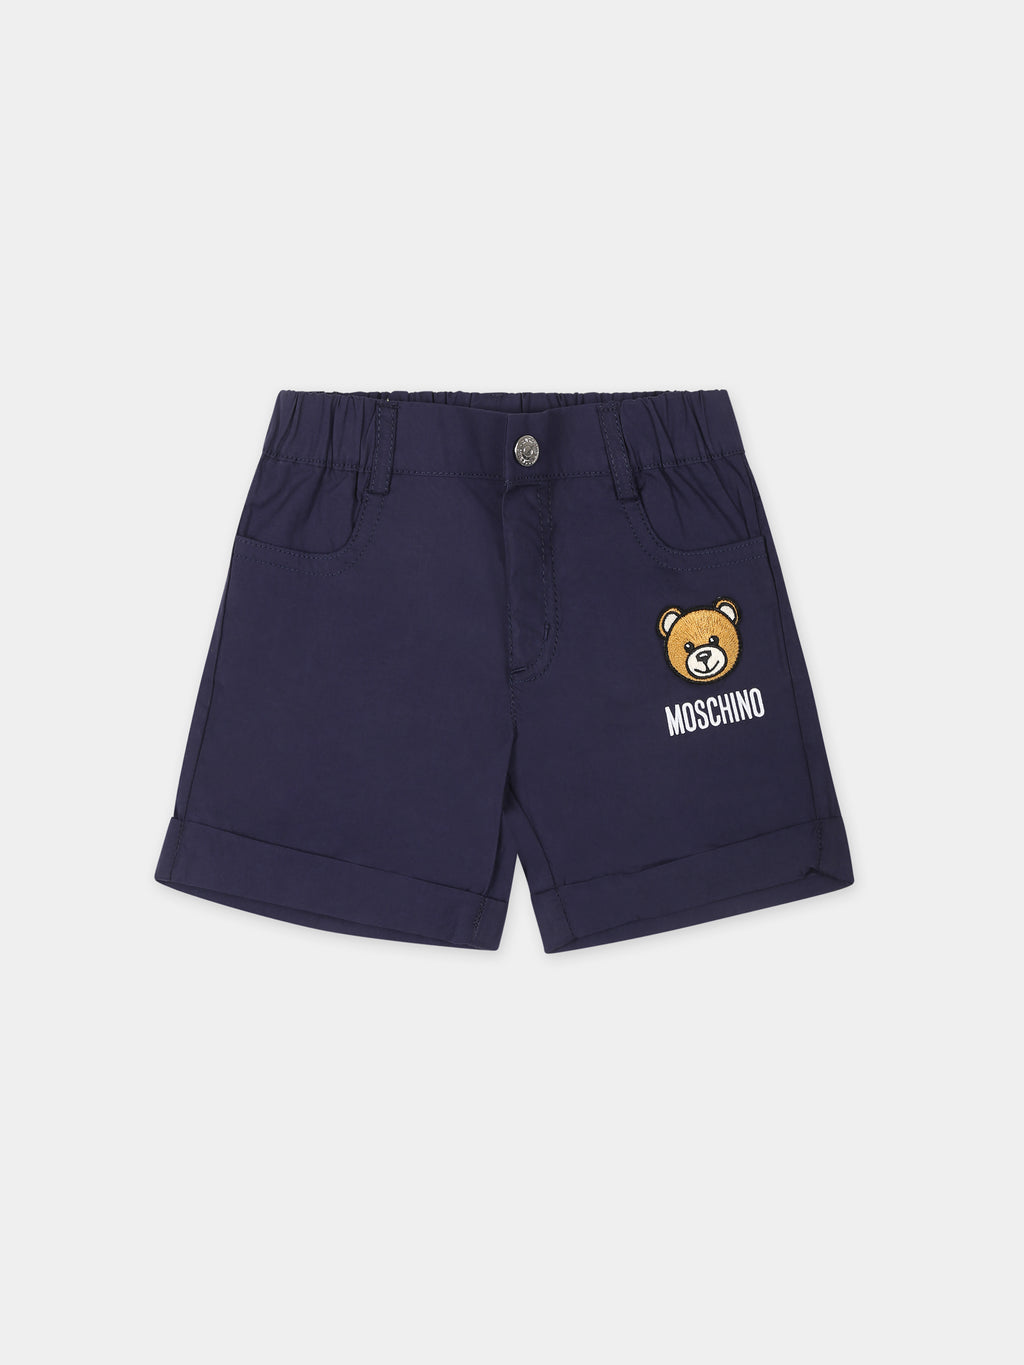 Blue shorts for baby boy with Teddy Bear and logo